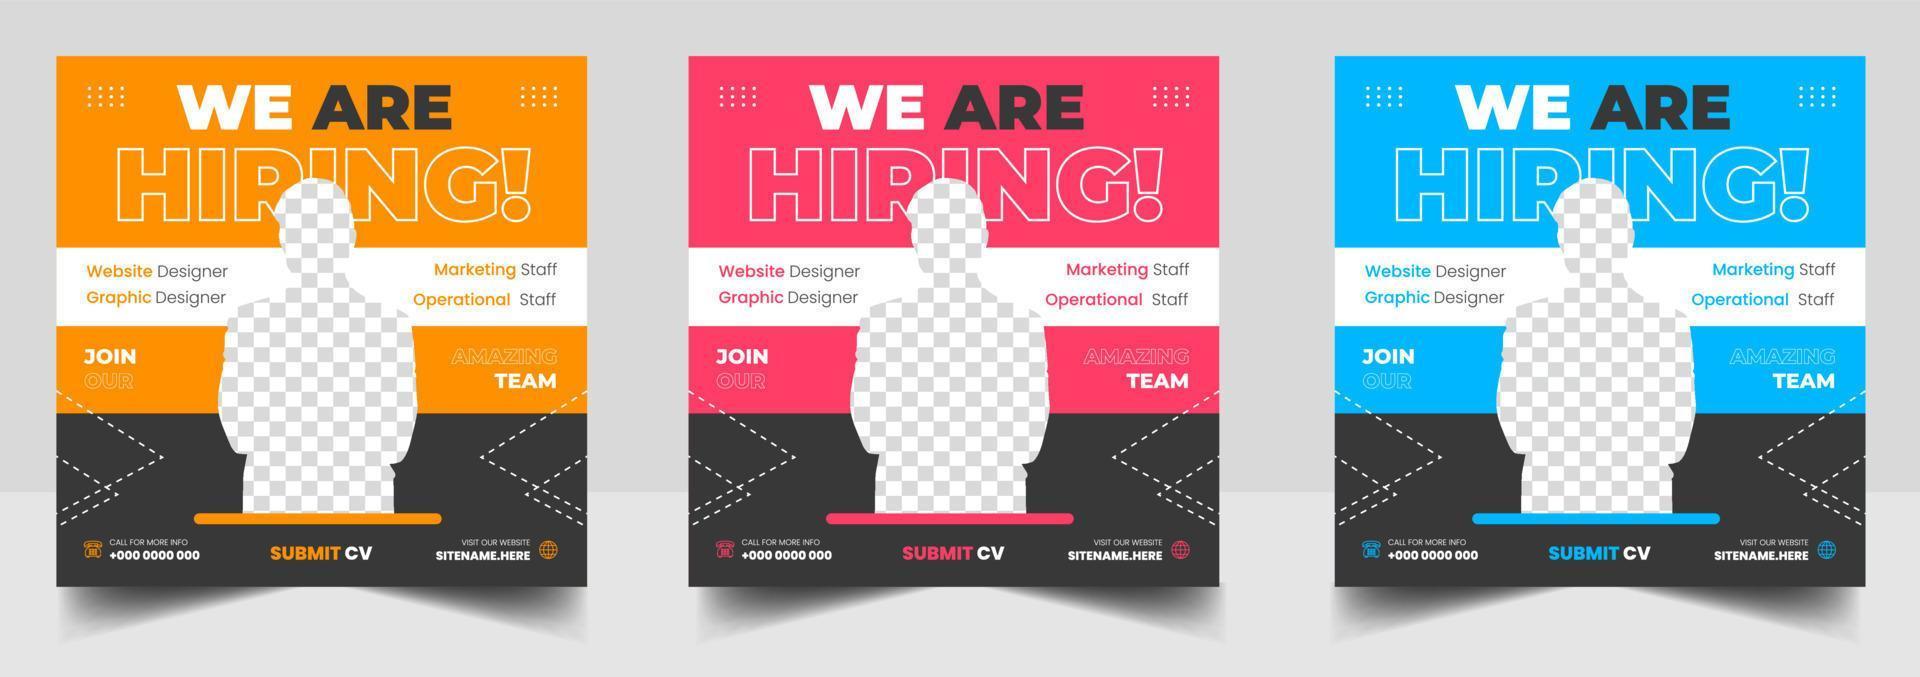 We are hiring job vacancy social media post banner design template with red, yellow and blue color. We are hiring job vacancy square web banner design. vector